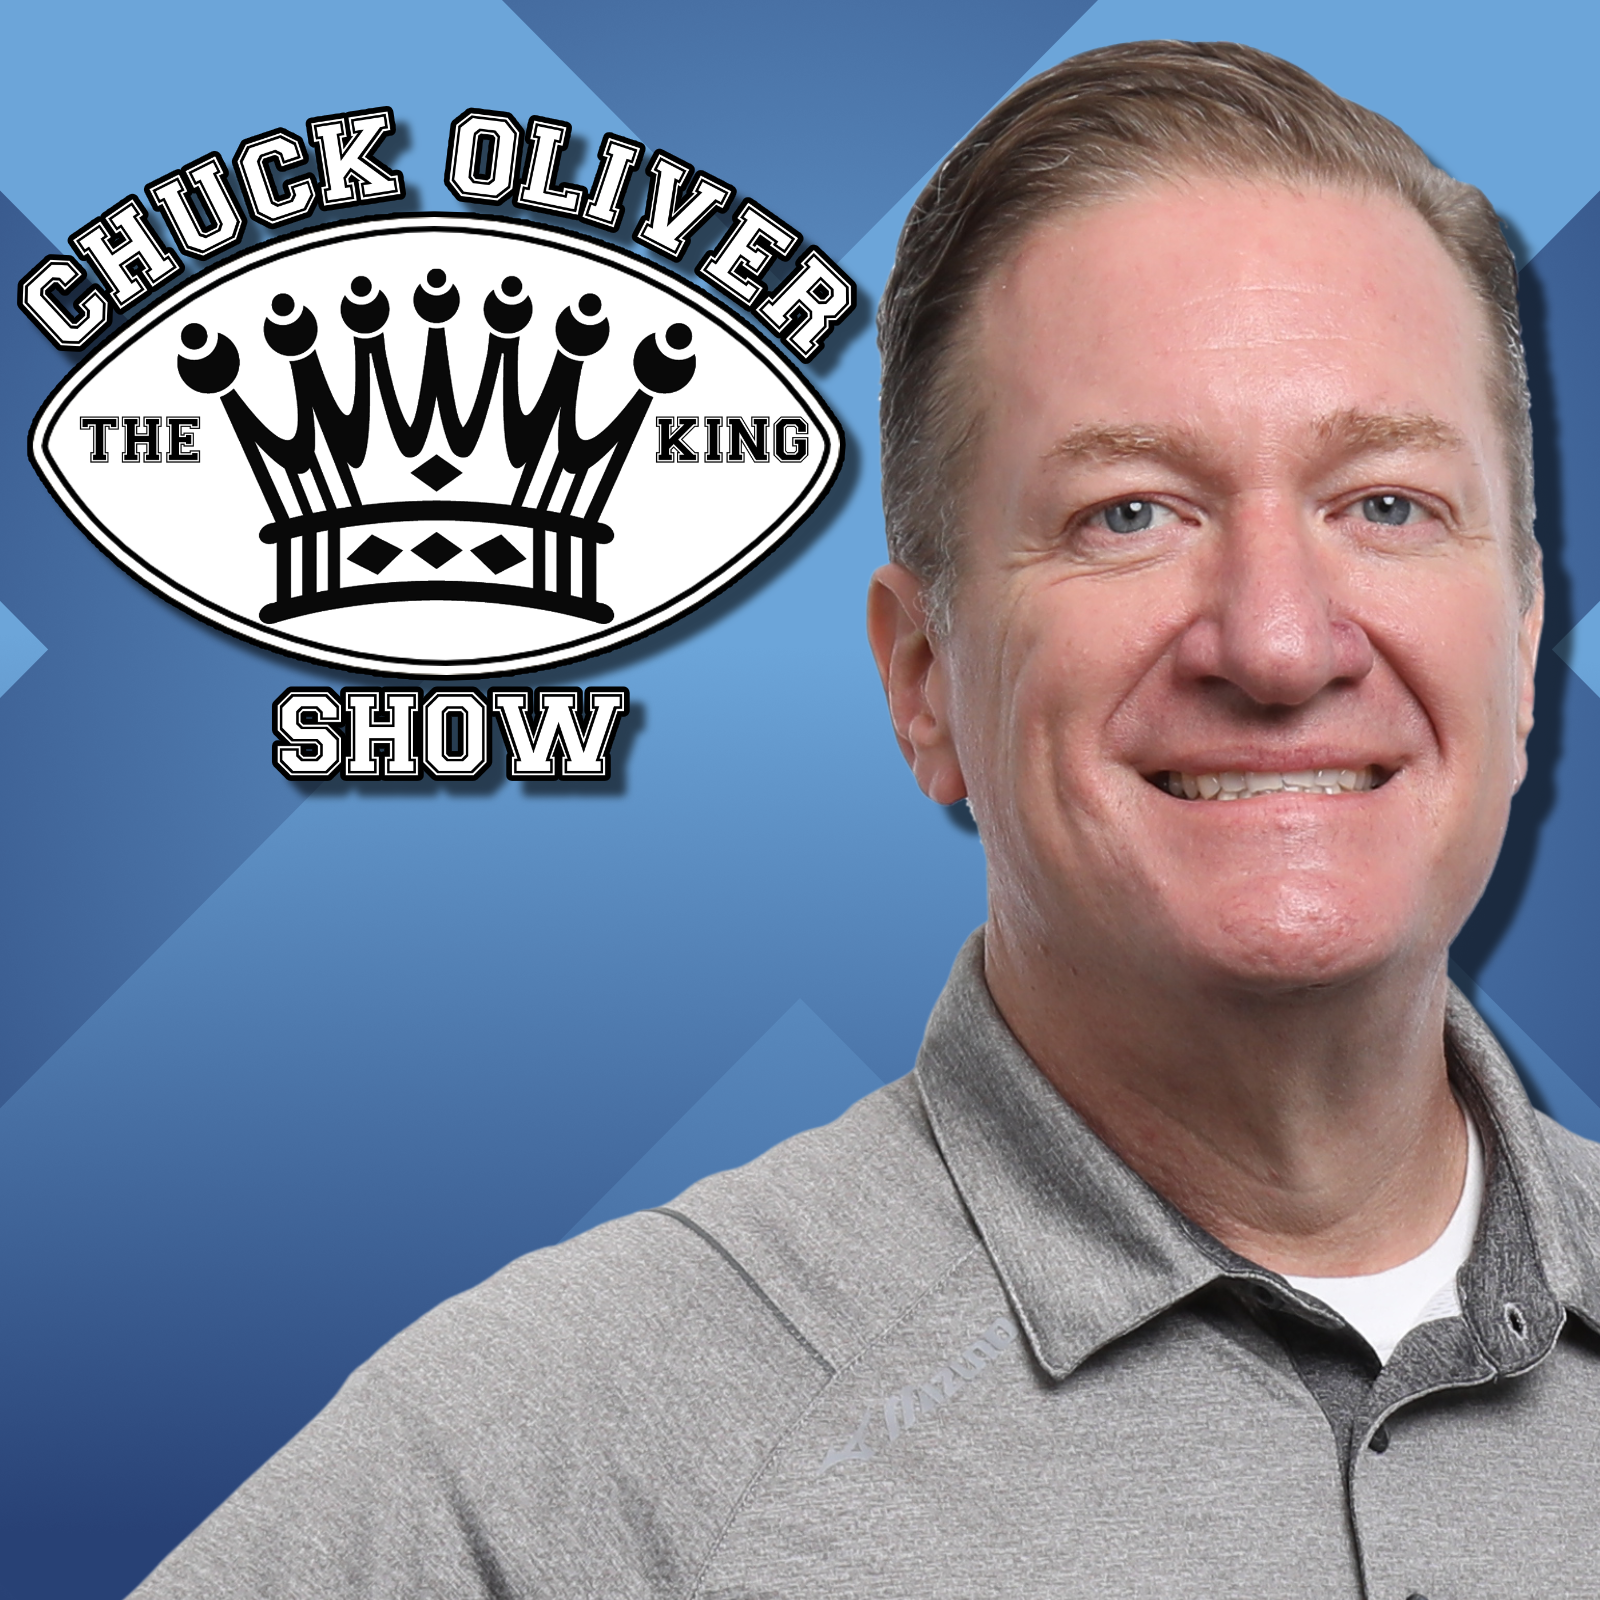 CHUCK OLIVER SHOW 3-15 FRIDAY HOUR 2